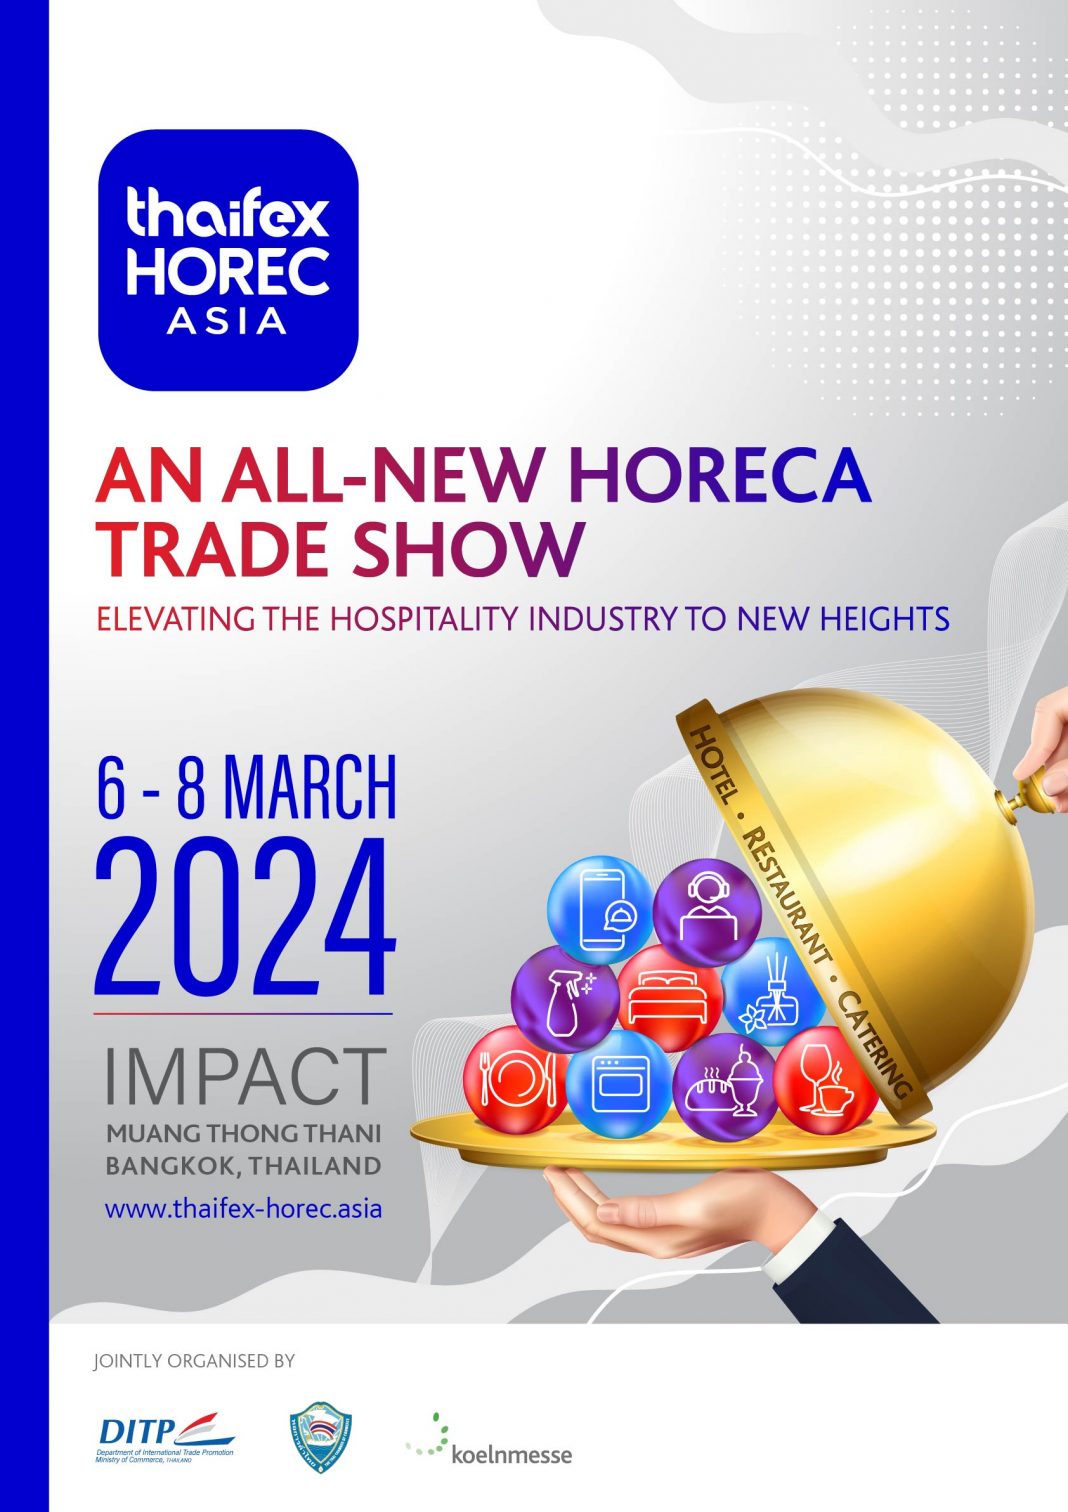 THAIFEX HOREC Asia to make its debut in 2024 Retail World Magazine